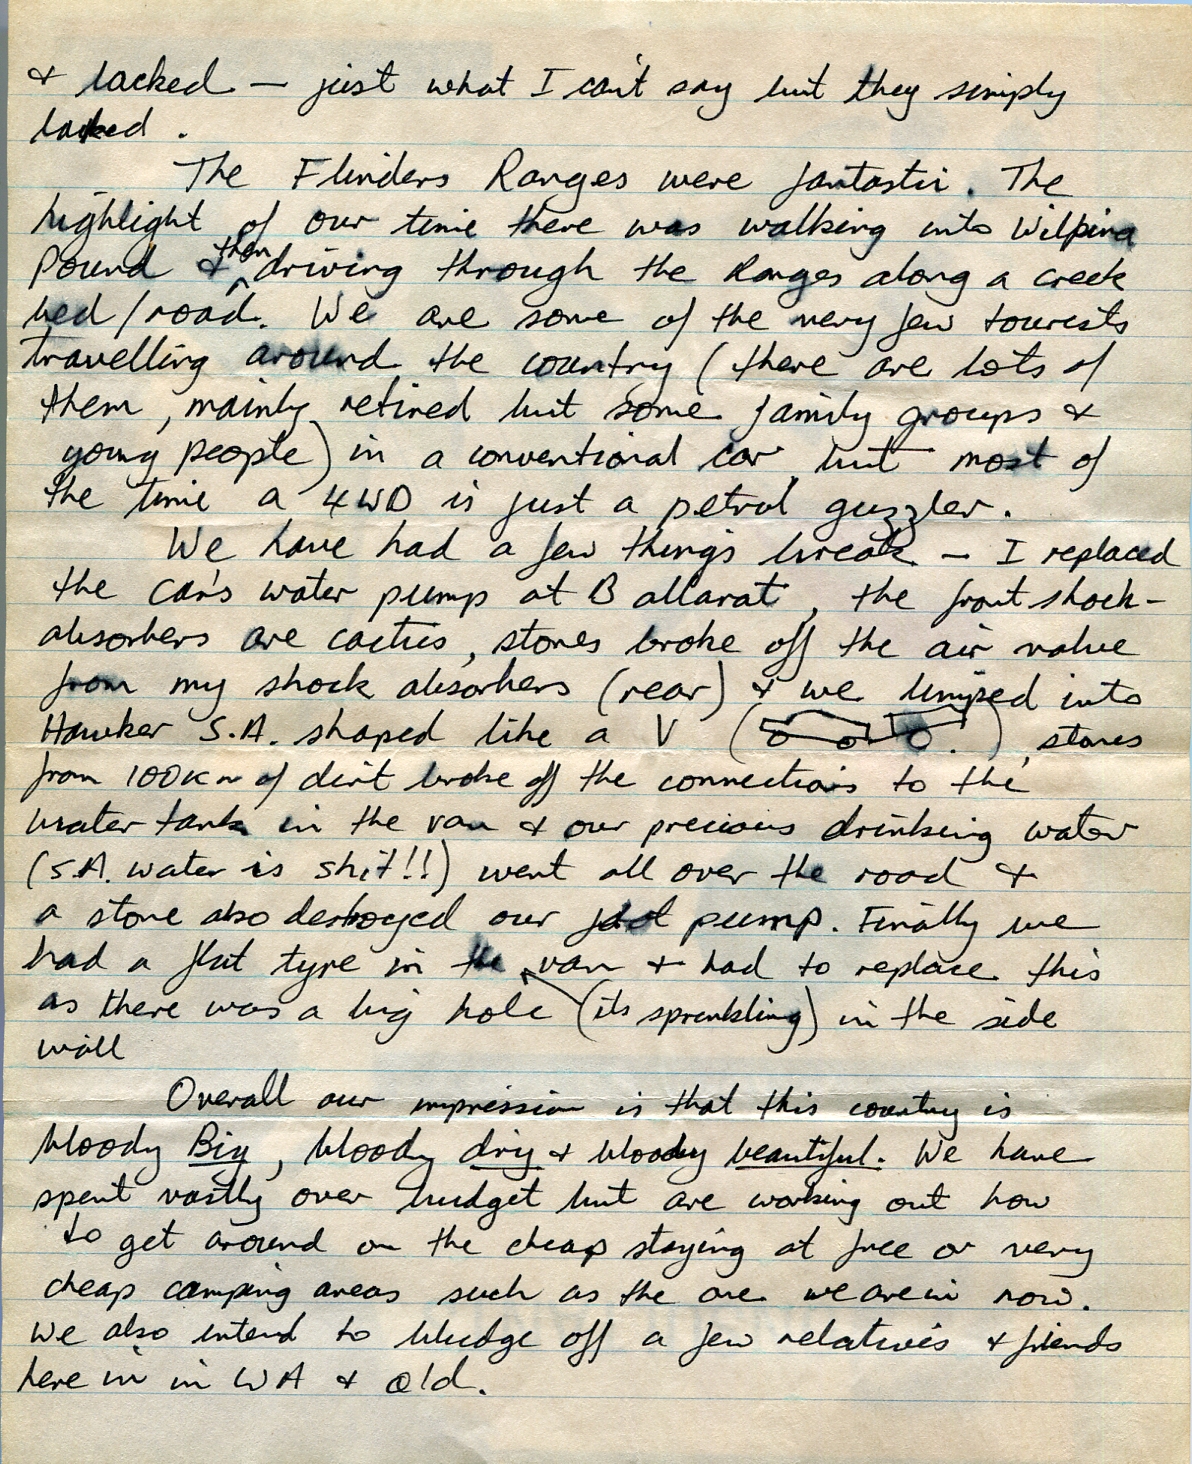 Letter from Ian and Jacqui to Gillian and Alberto and family 6th April 1990 Shannon NP WA page 003.jpg, May 2022